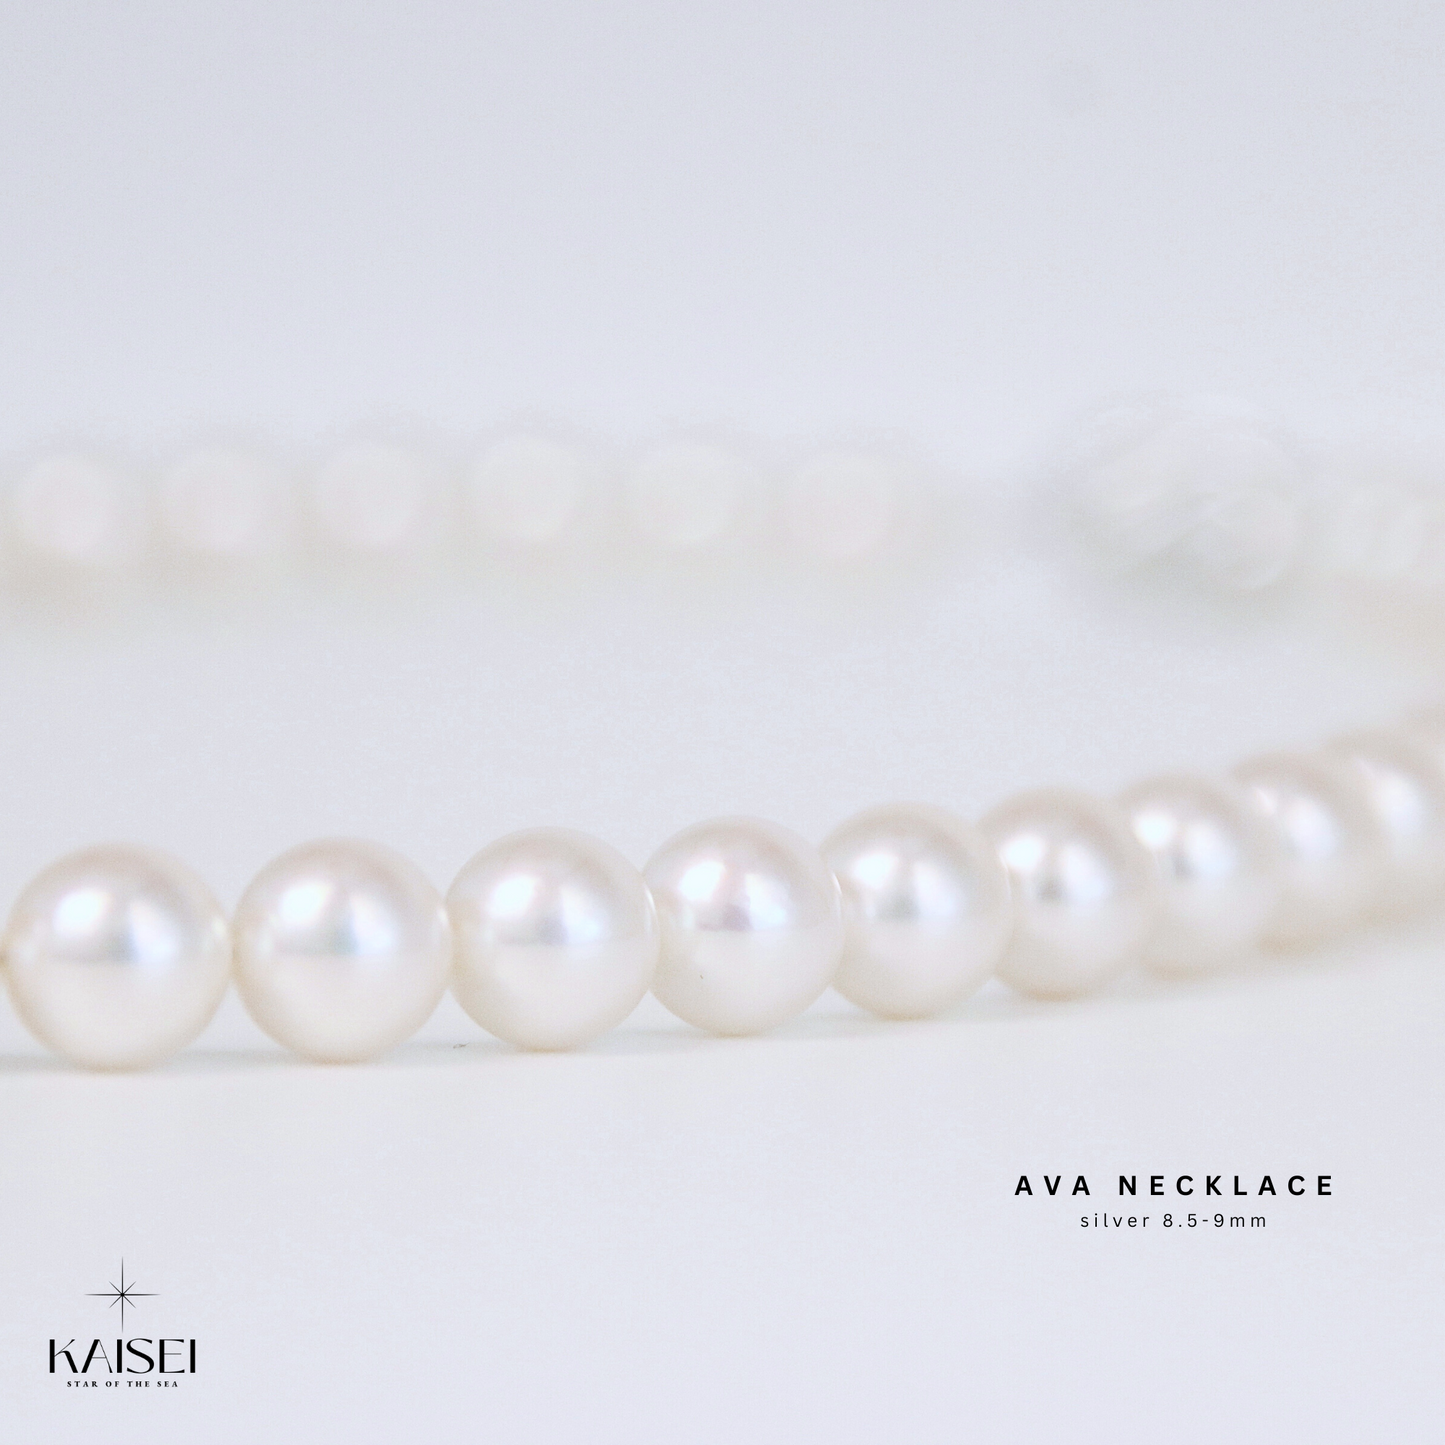 Kaisei Pearl - Ava Necklace Akoya Japanese Pearl 8.5-9mm Necklace Jewelry